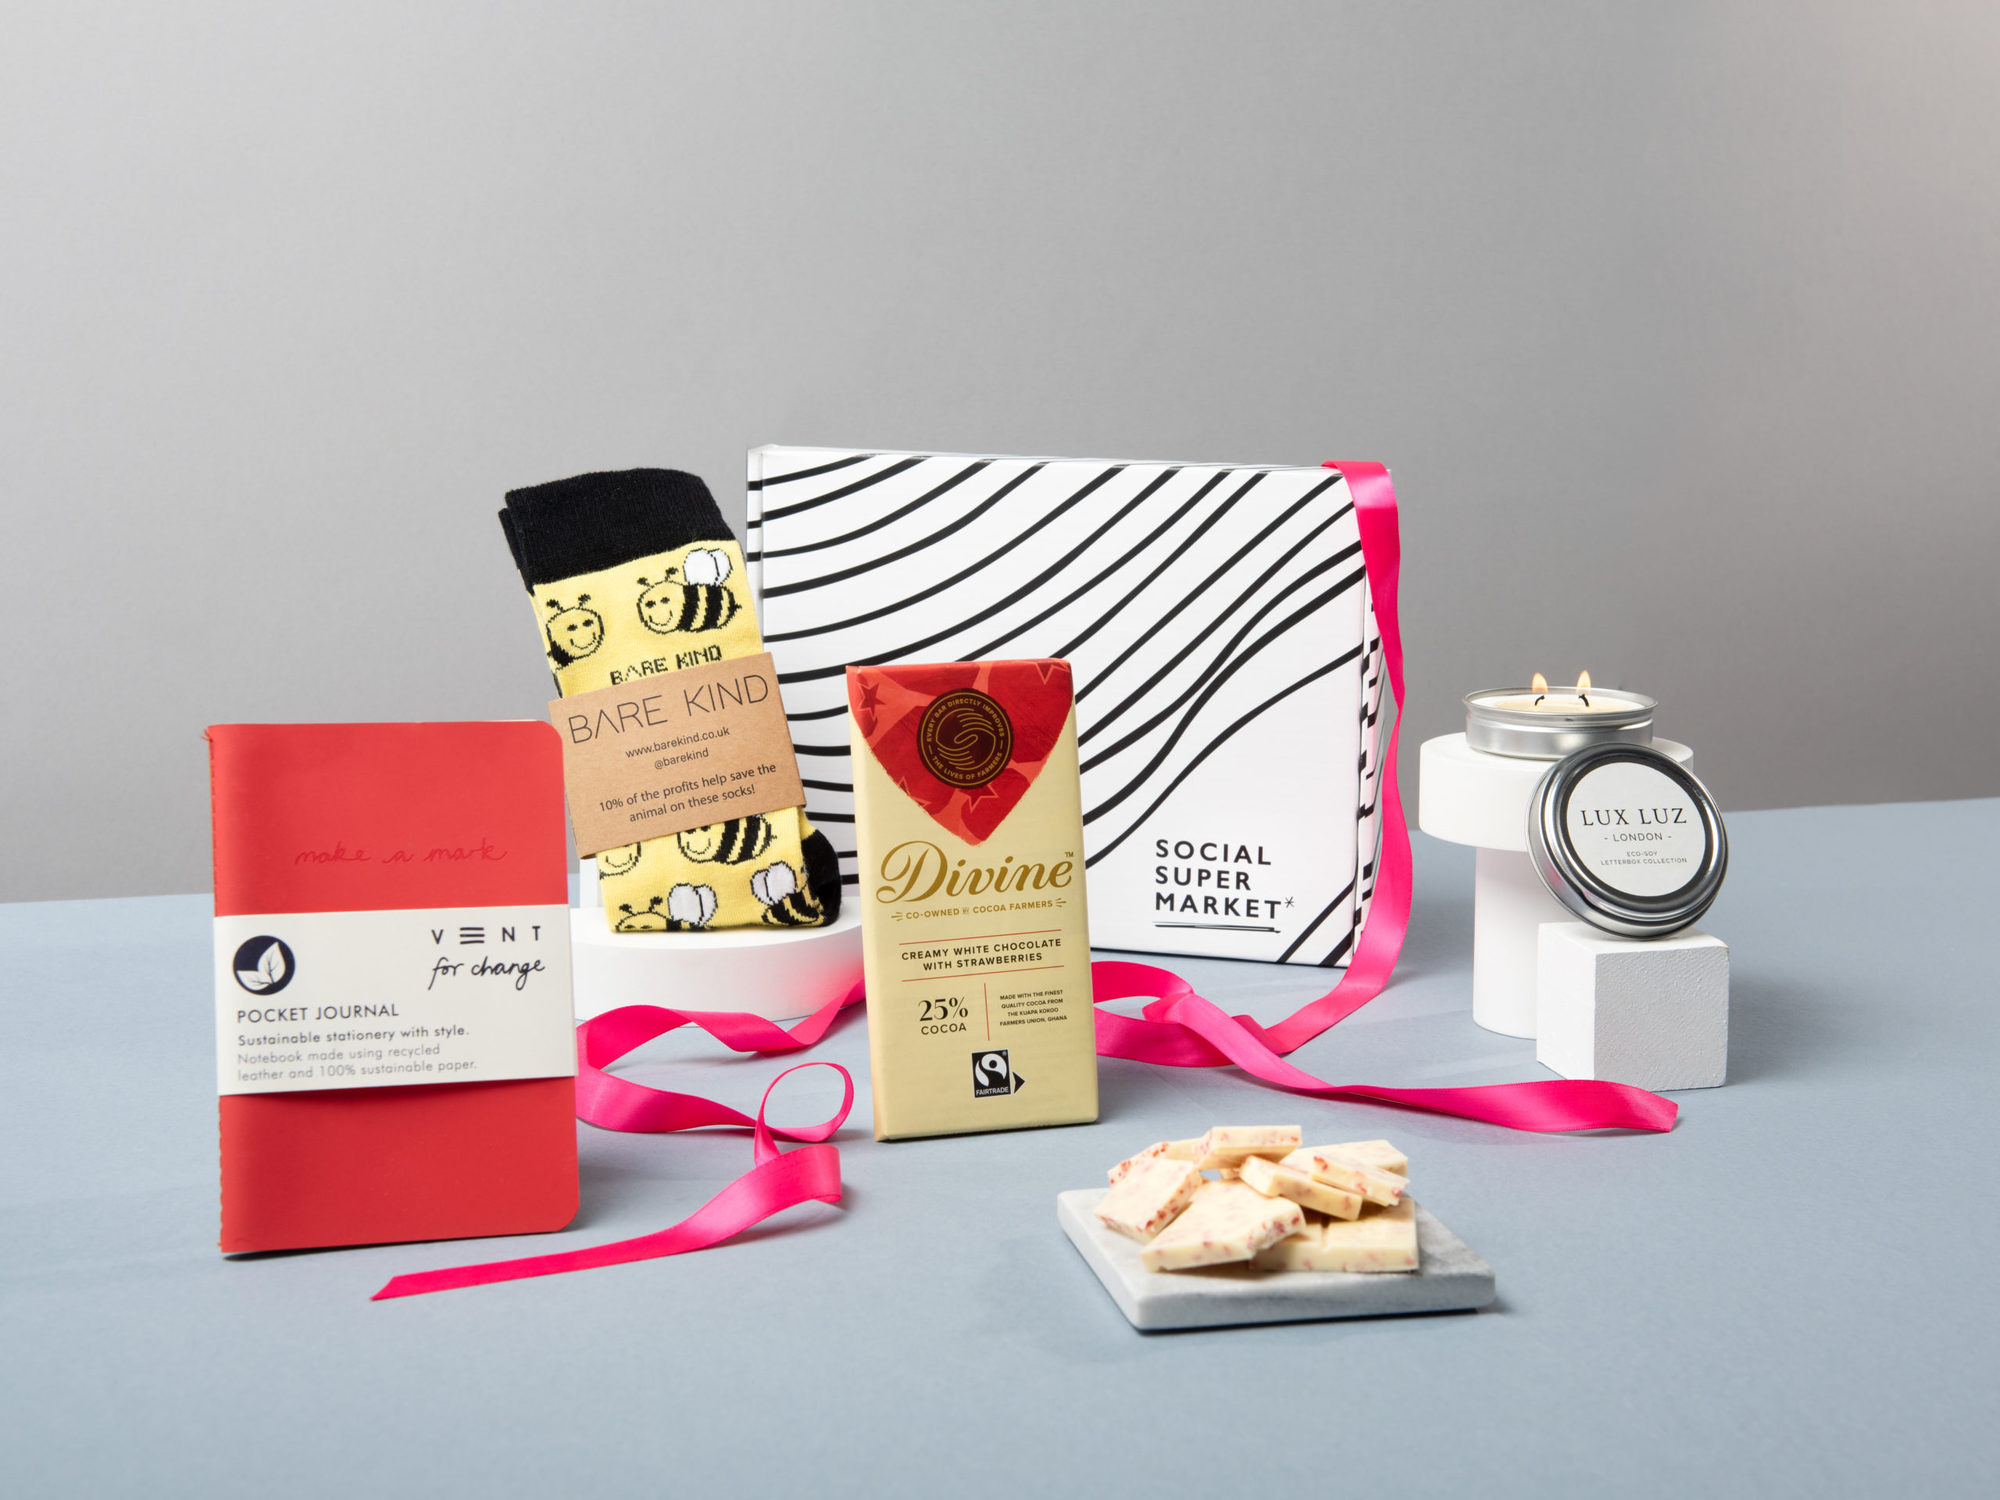 The Bee Mine Valentine's Letterbox Gift with its contents surrounding the box they come in – including a VENT For Change red pocket notebook, Bare Kind bee socks, a Divine Chocolate bar and LUX LUZ eco-soy letterbox candle.